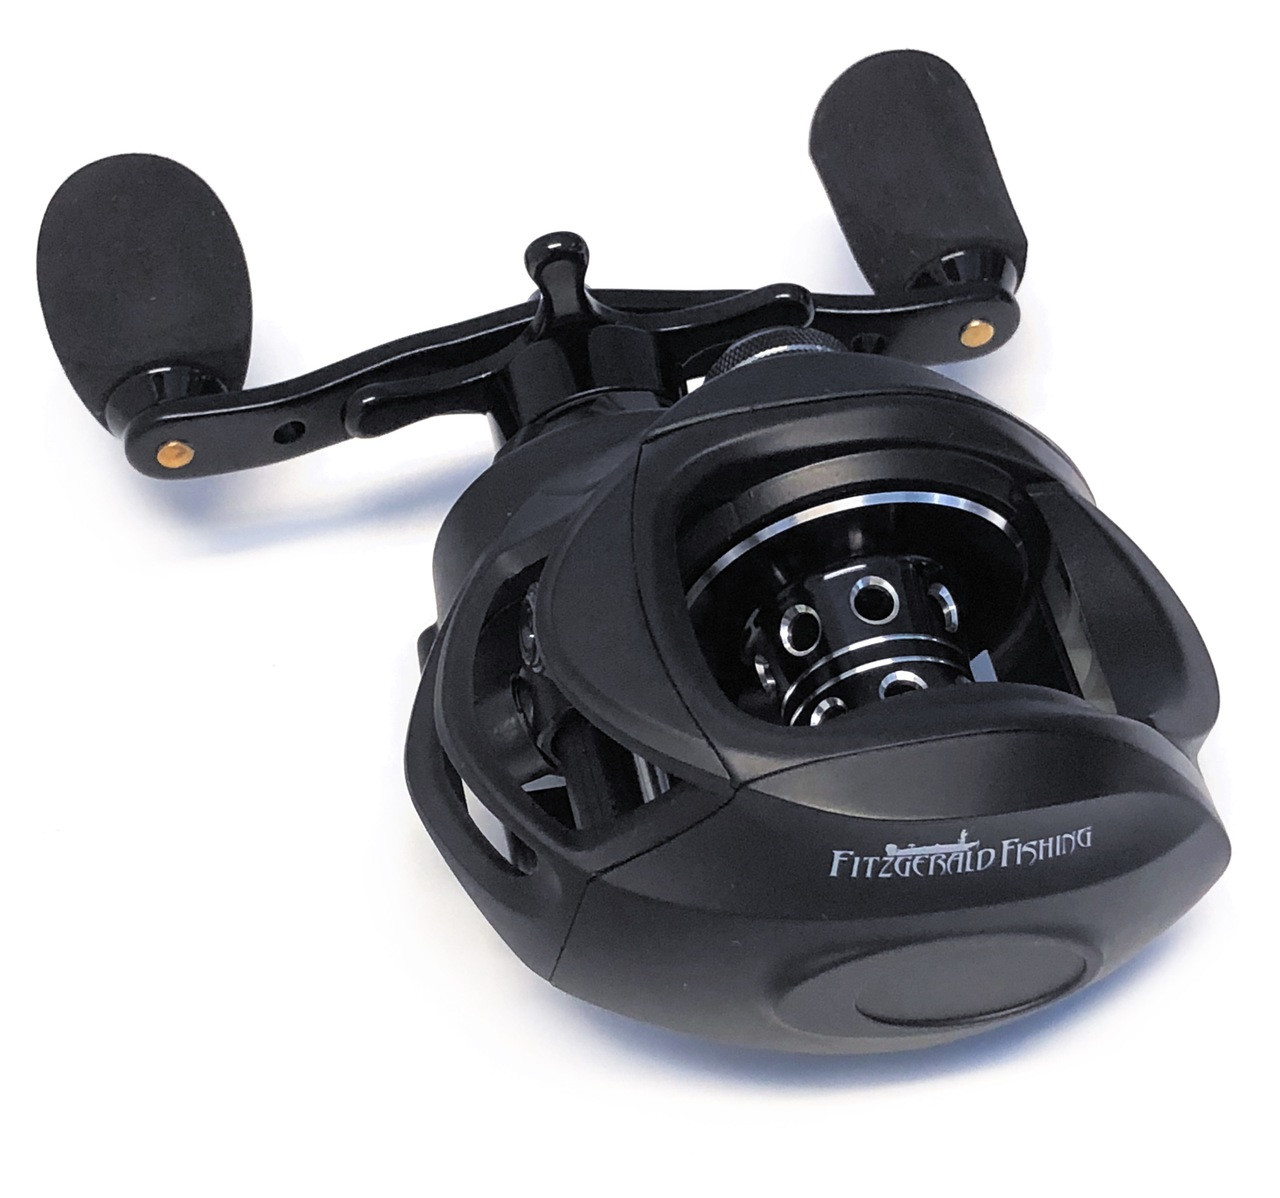 Long-Lasting and Low-Maintenance Fitzgerald Fishing FX8 Casting Reel  Available at .